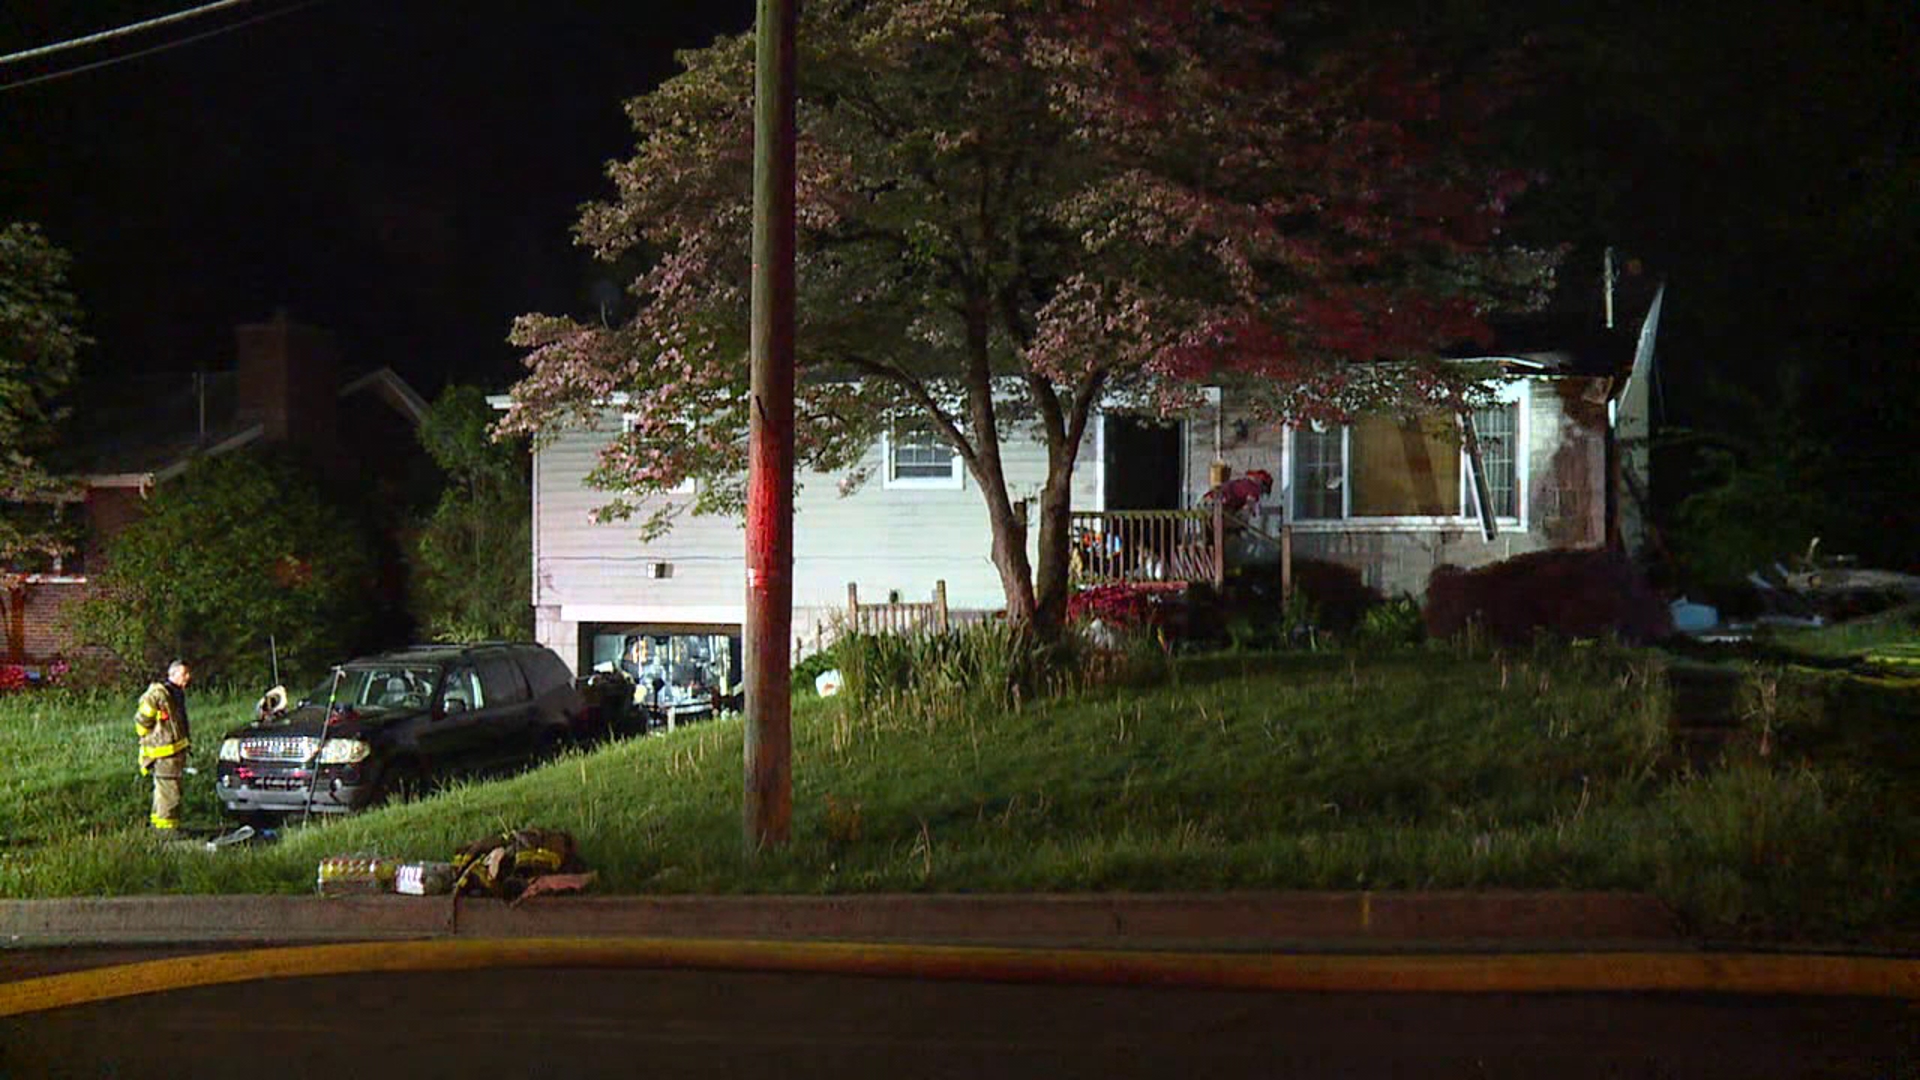 Flames broke out around 3 a.m. Wednesday in Hanover Township, near Wilkes-Barre.